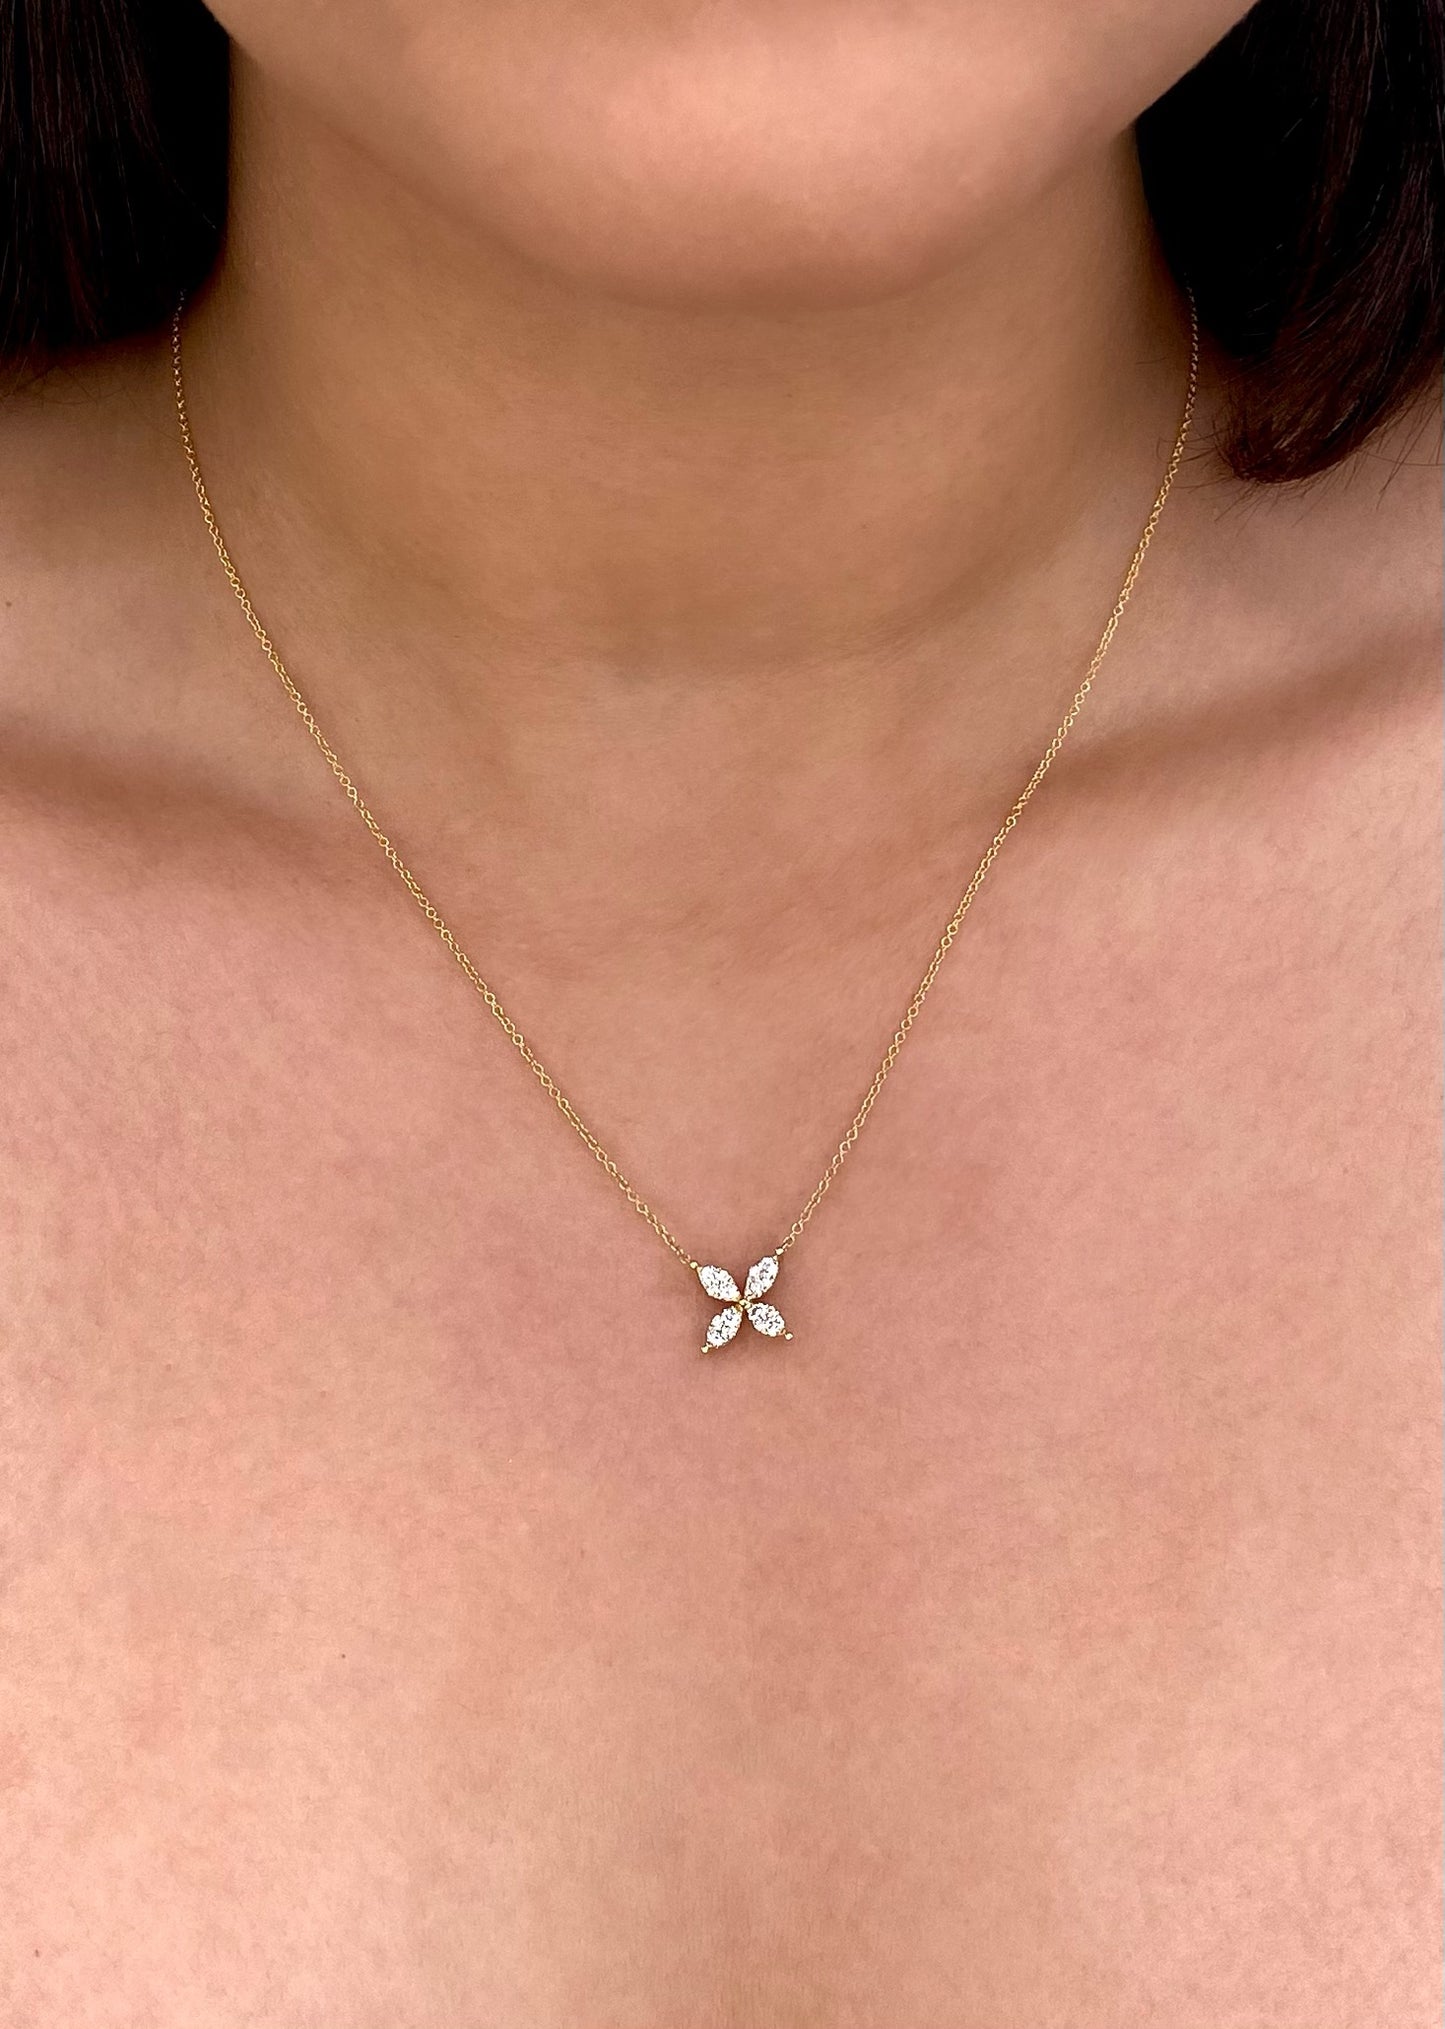 14K Solid Gold Flower Pendant Necklace with Natural Diamonds